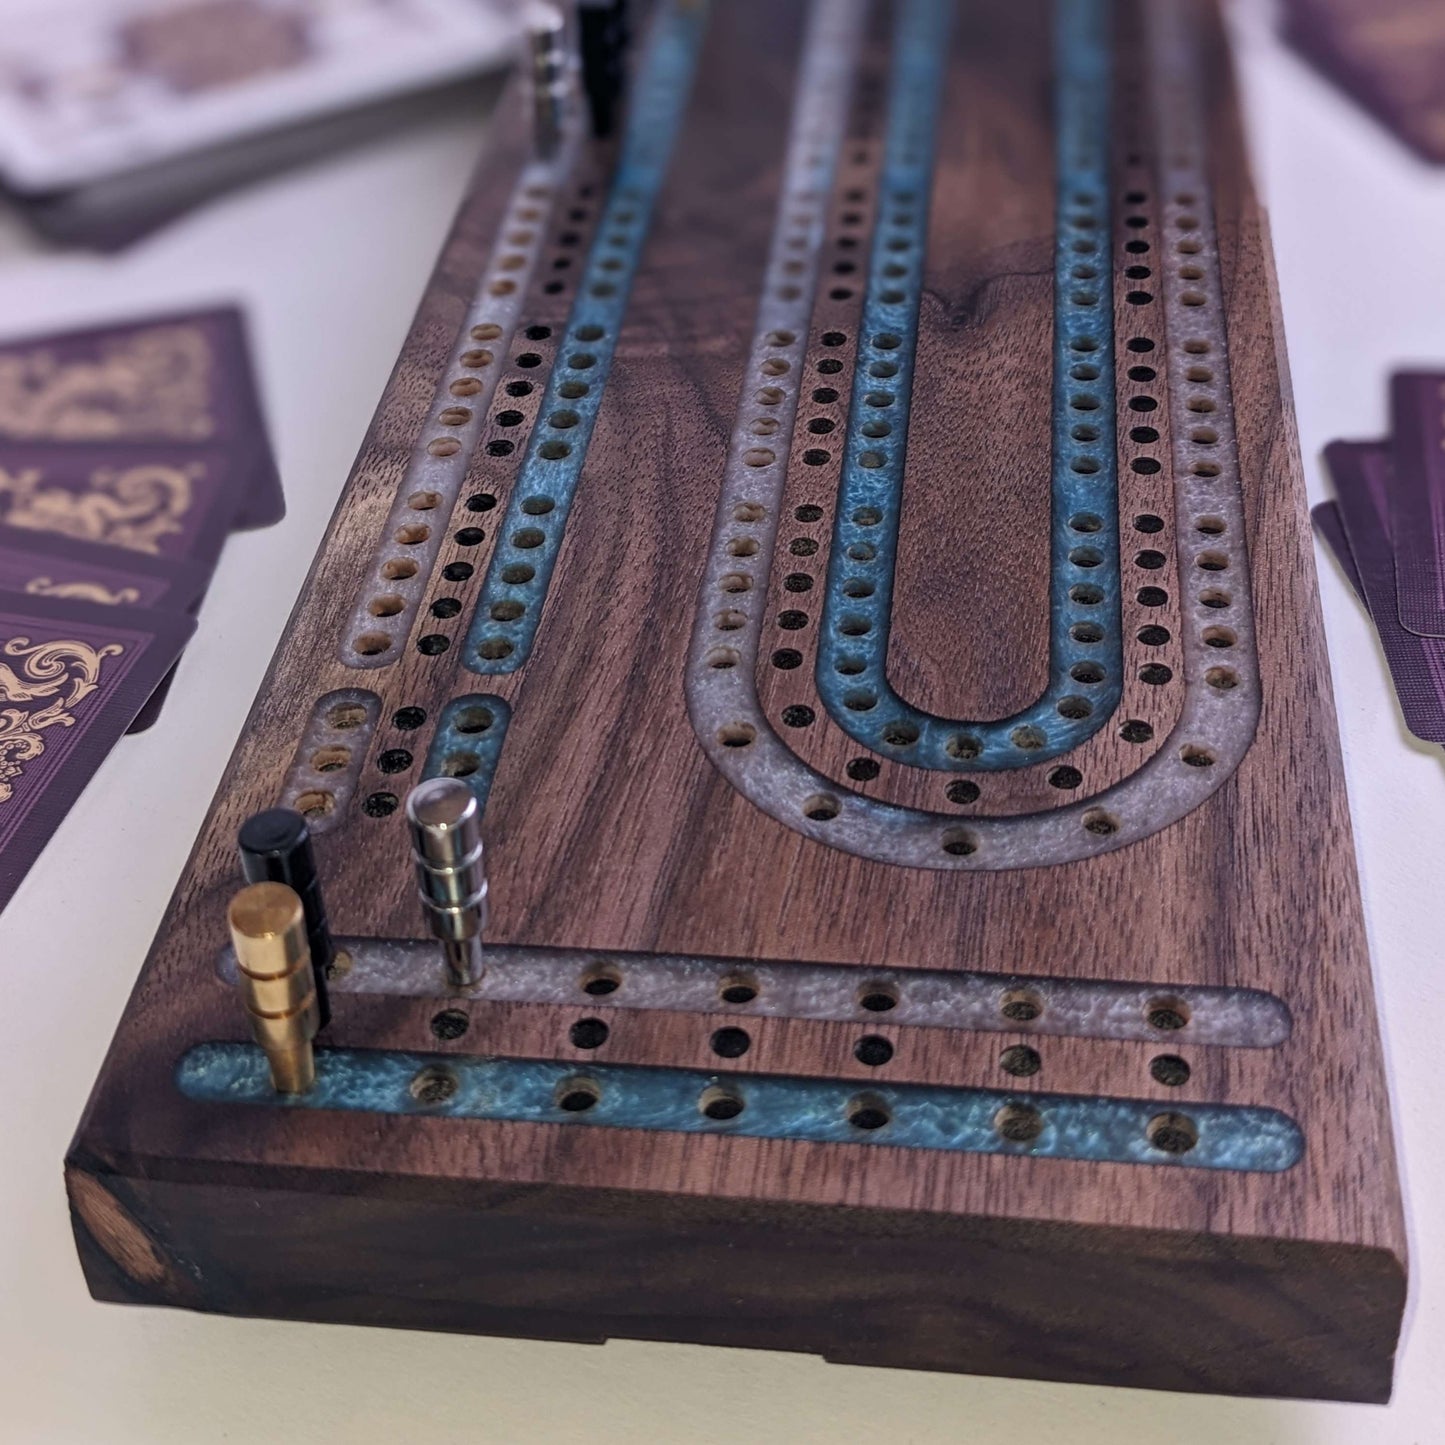 Premium Cribbage Board - Multi Lane Resin Track Inlays - Personalization Available in Cart/Checkout